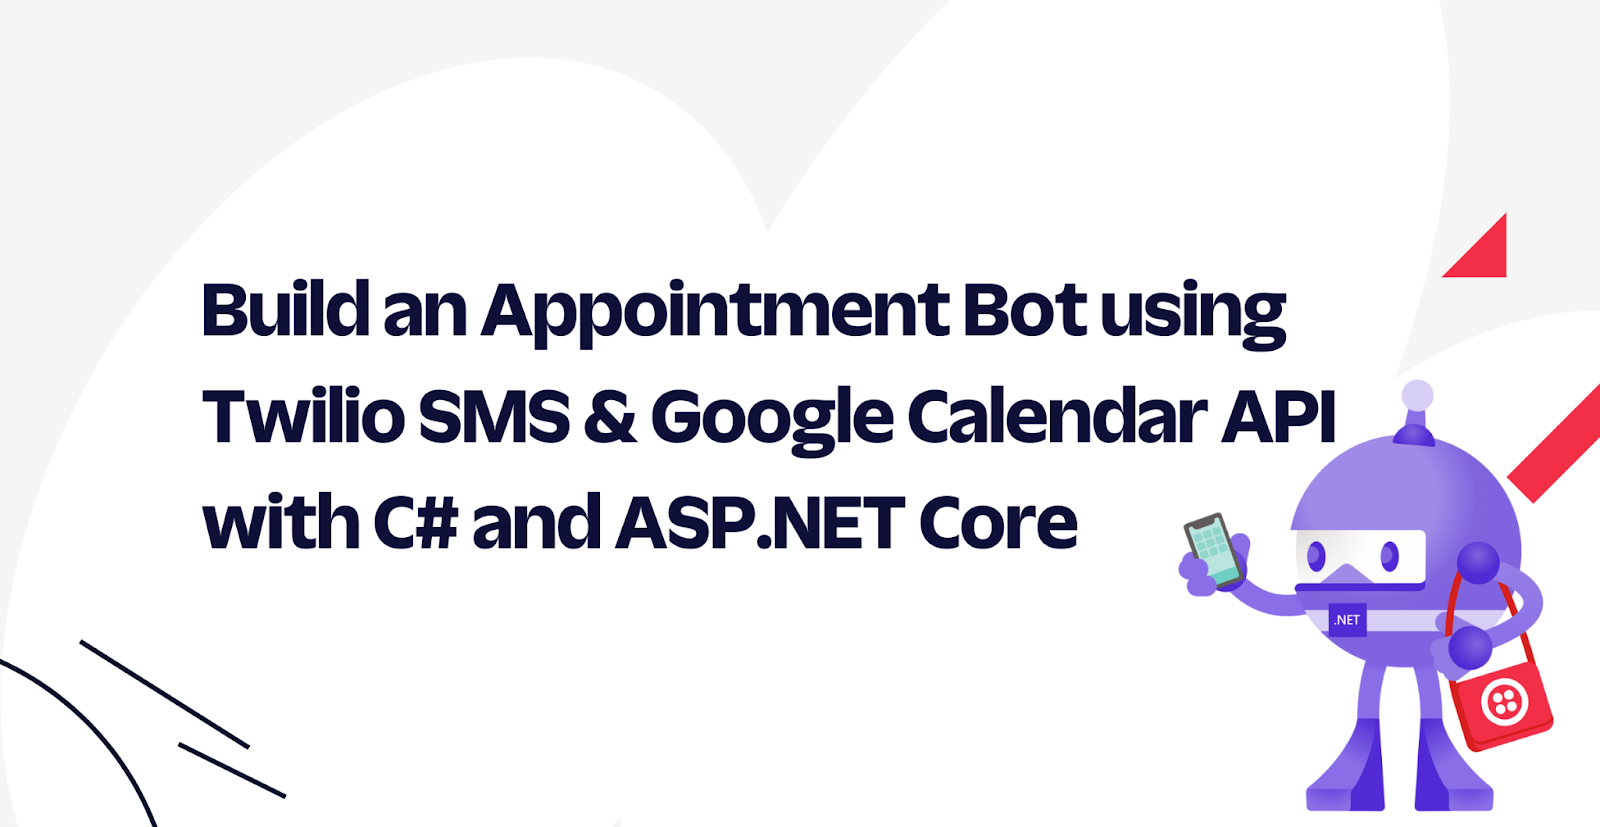 Build an Appointment Bot using Twilio SMS & Google Calendar API with C# and ASP.NET Core